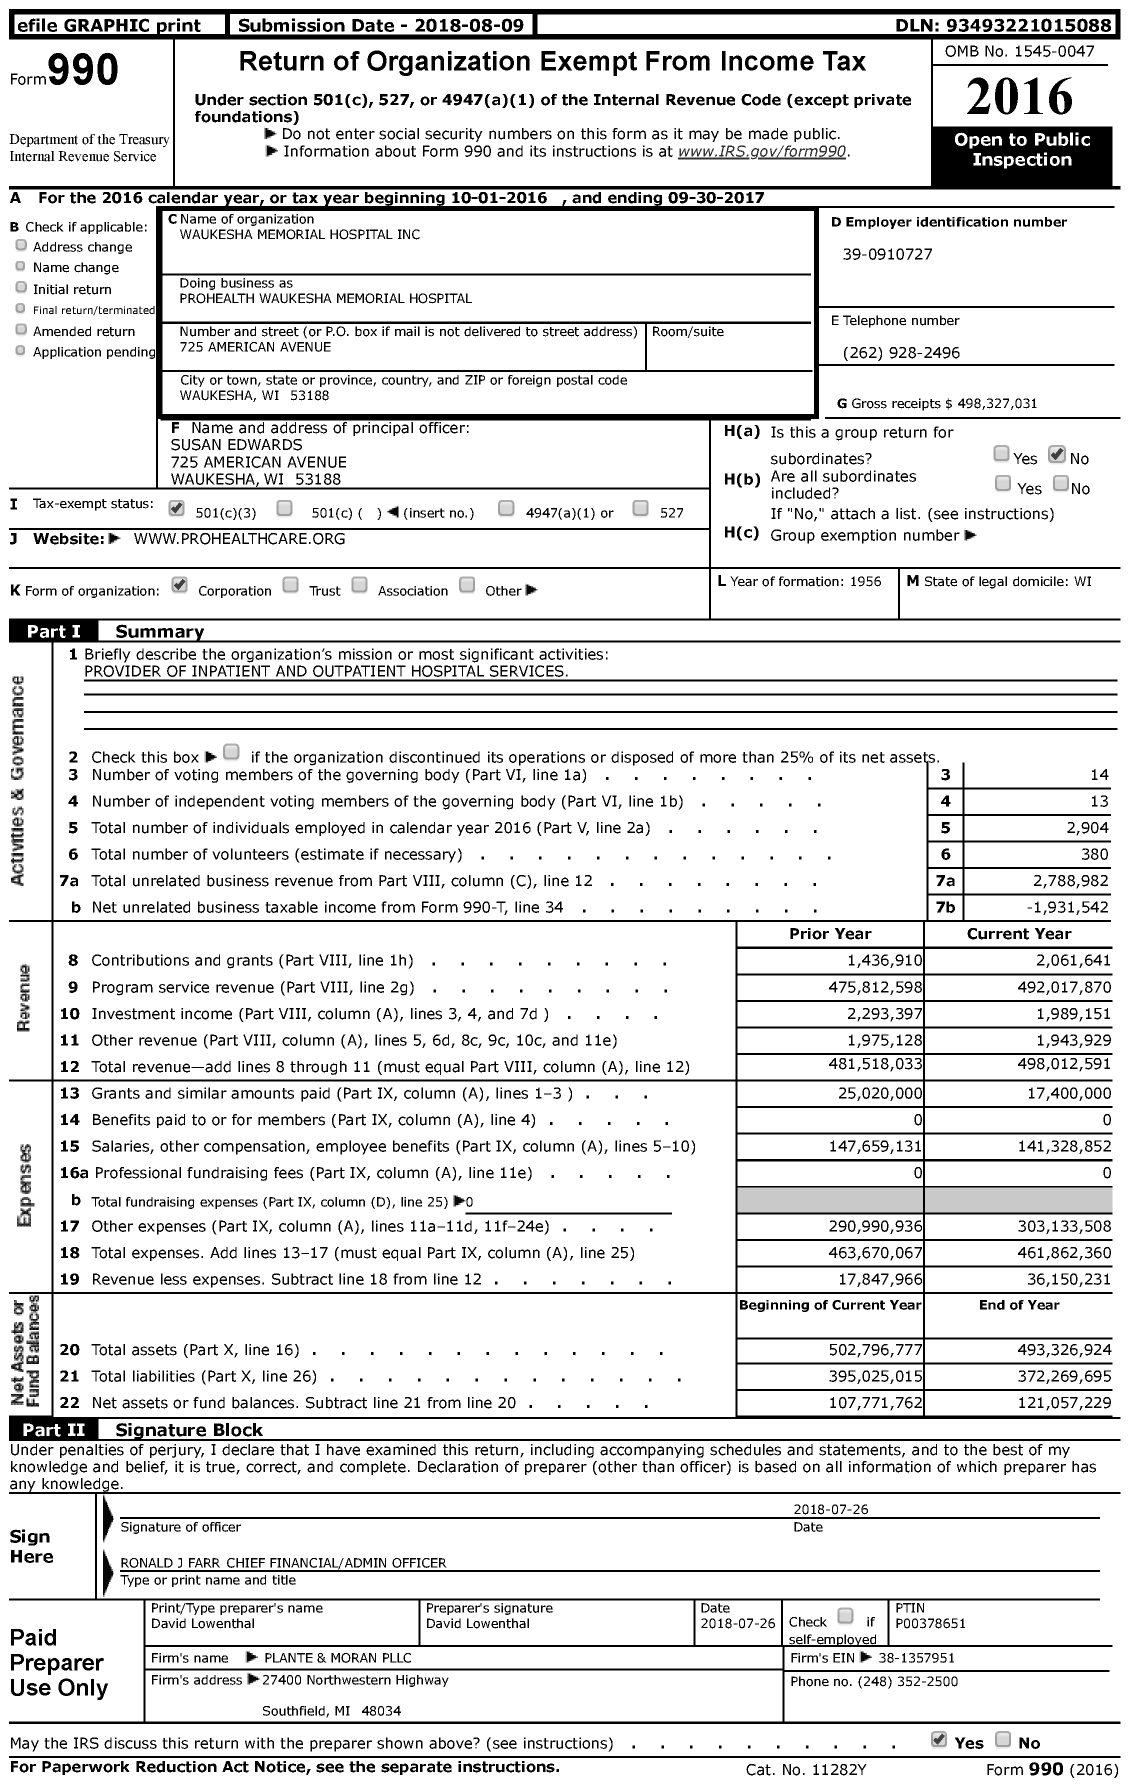 Image of first page of 2016 Form 990 for Prohealth Waukesha Memorial Hospital (WMH)